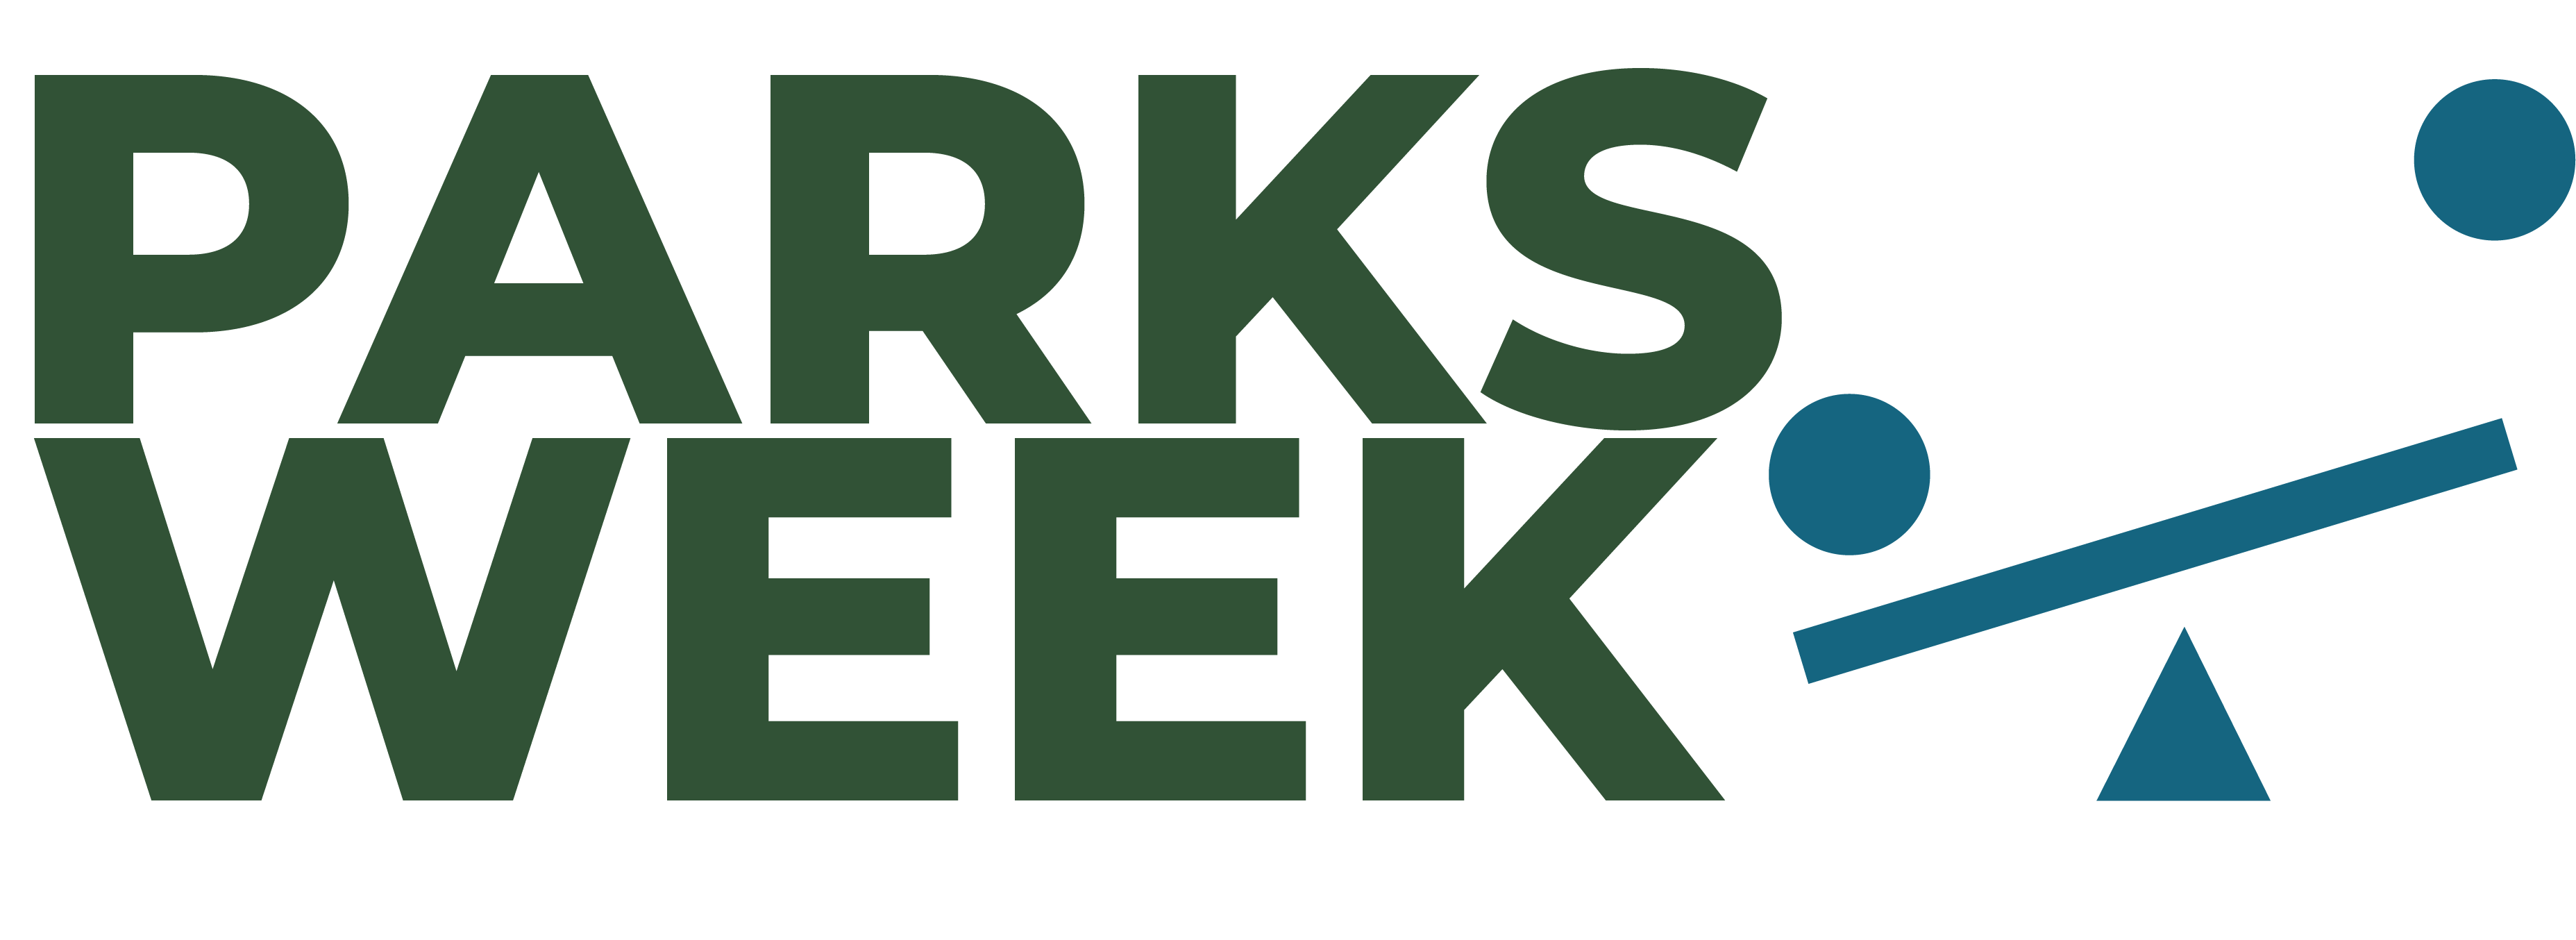 Parks week logo, with the words "Parks Week" in green, and a stylised image of a seesaw with two people on it.